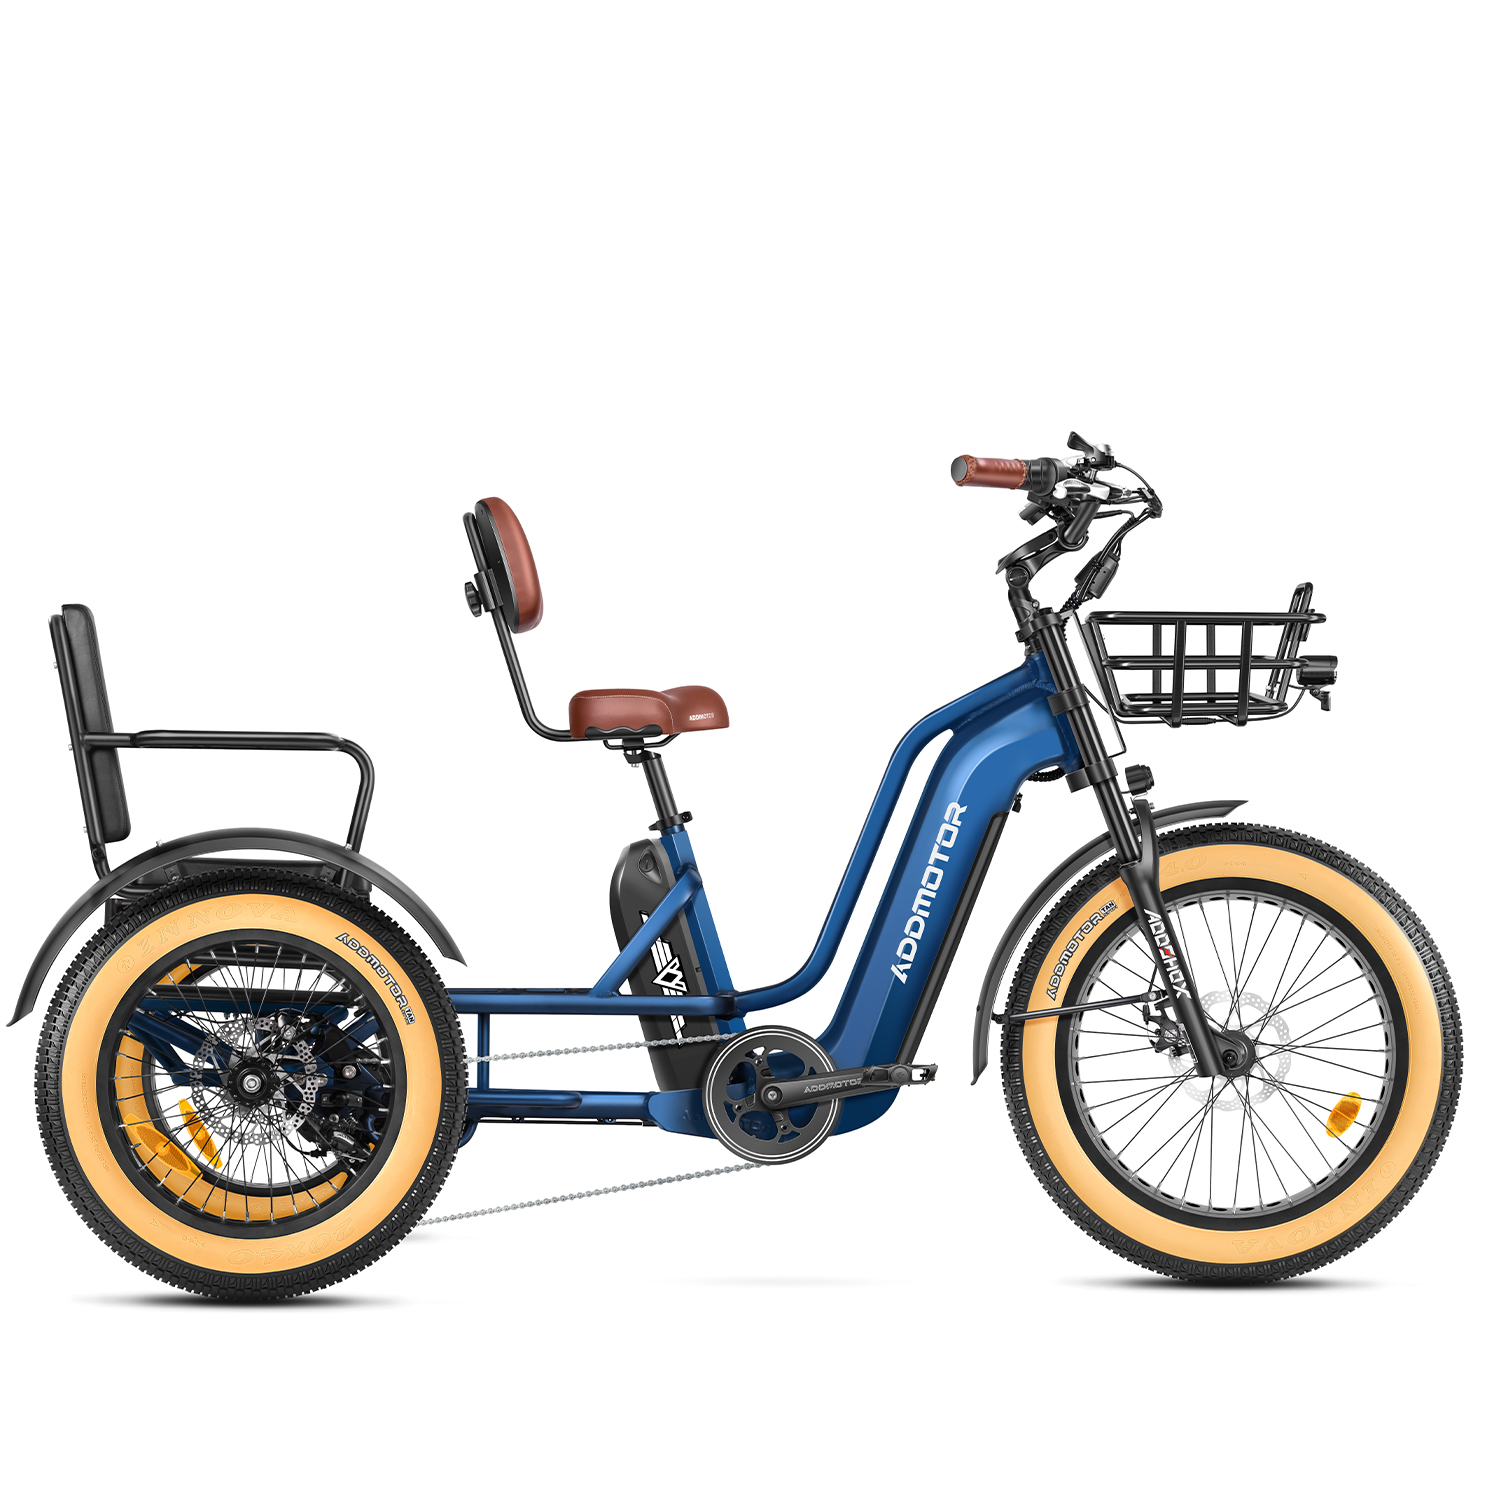 Introducing the Addmotor GREATTAN L | The Electric Passenger Trike That's Built for Family